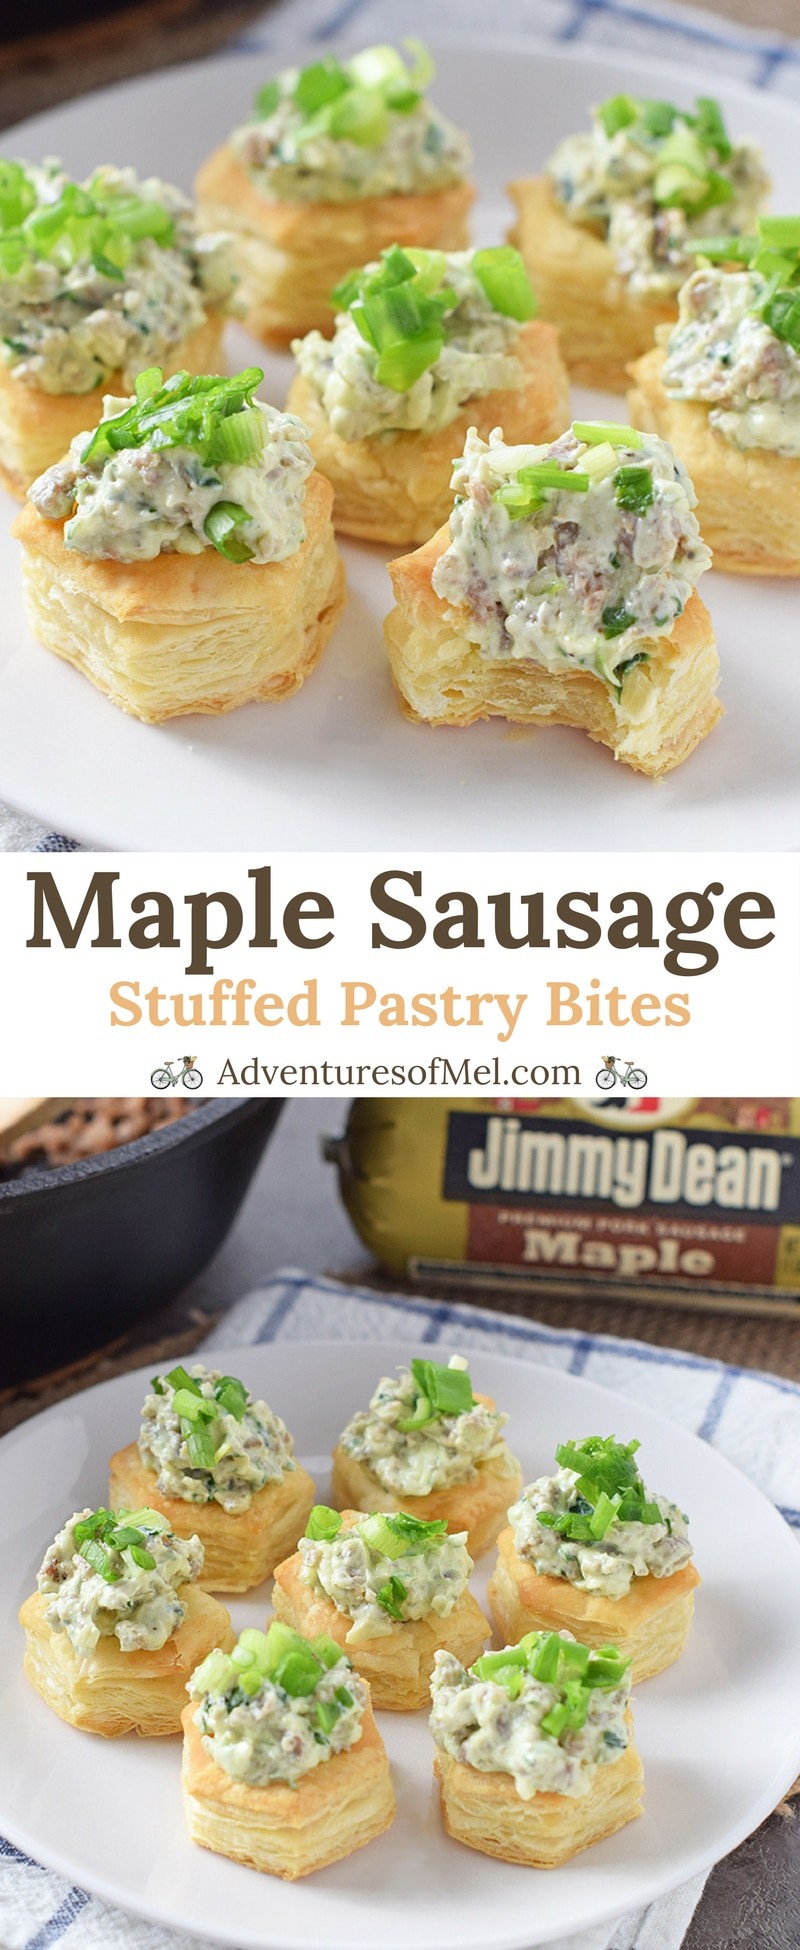 Maple Sausage Stuffed Pastry Bites, made with cream cheese and spinach, are the ultimate appetizer and finger food idea for your holiday party.